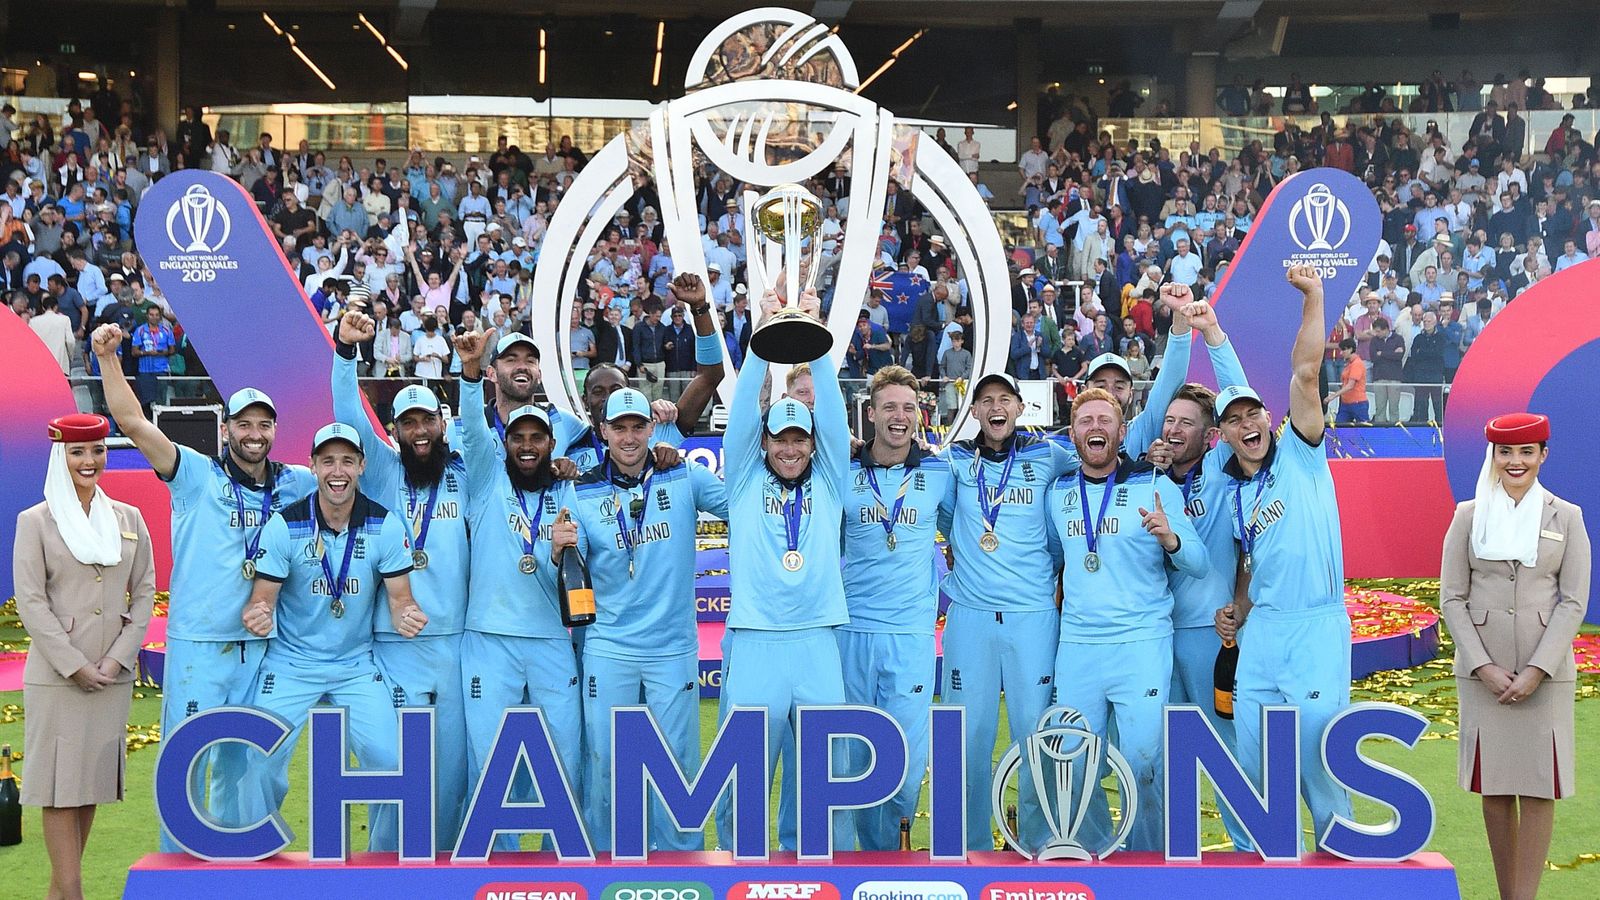 the-greatest-game-sky-to-show-documentary-on-how-england-won-the-2019-cricket-world-cup